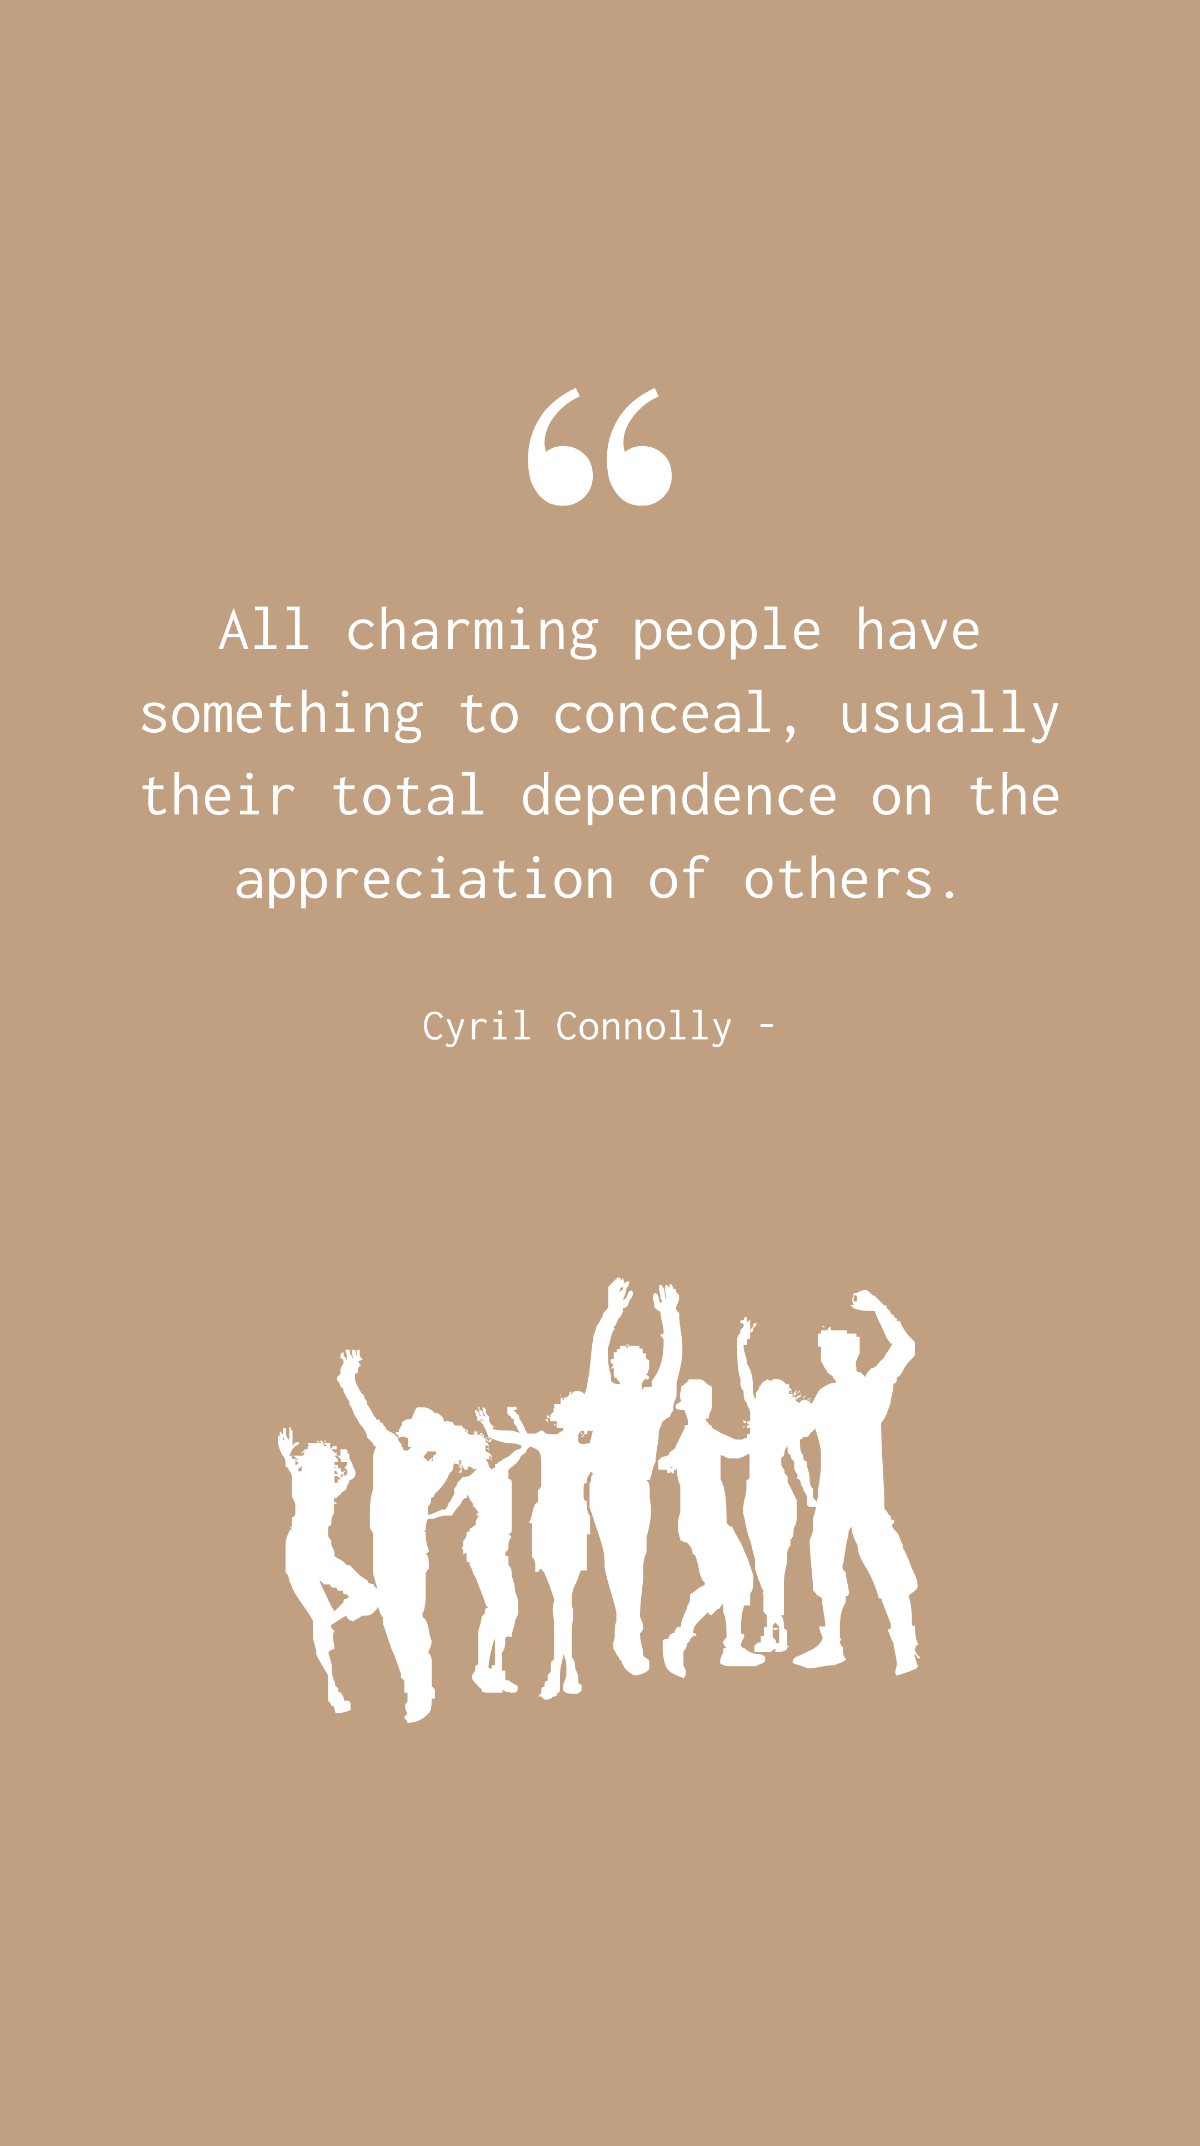 Cyril Connolly - All charming people have something to conceal, usually their total dependence on the appreciation of others.